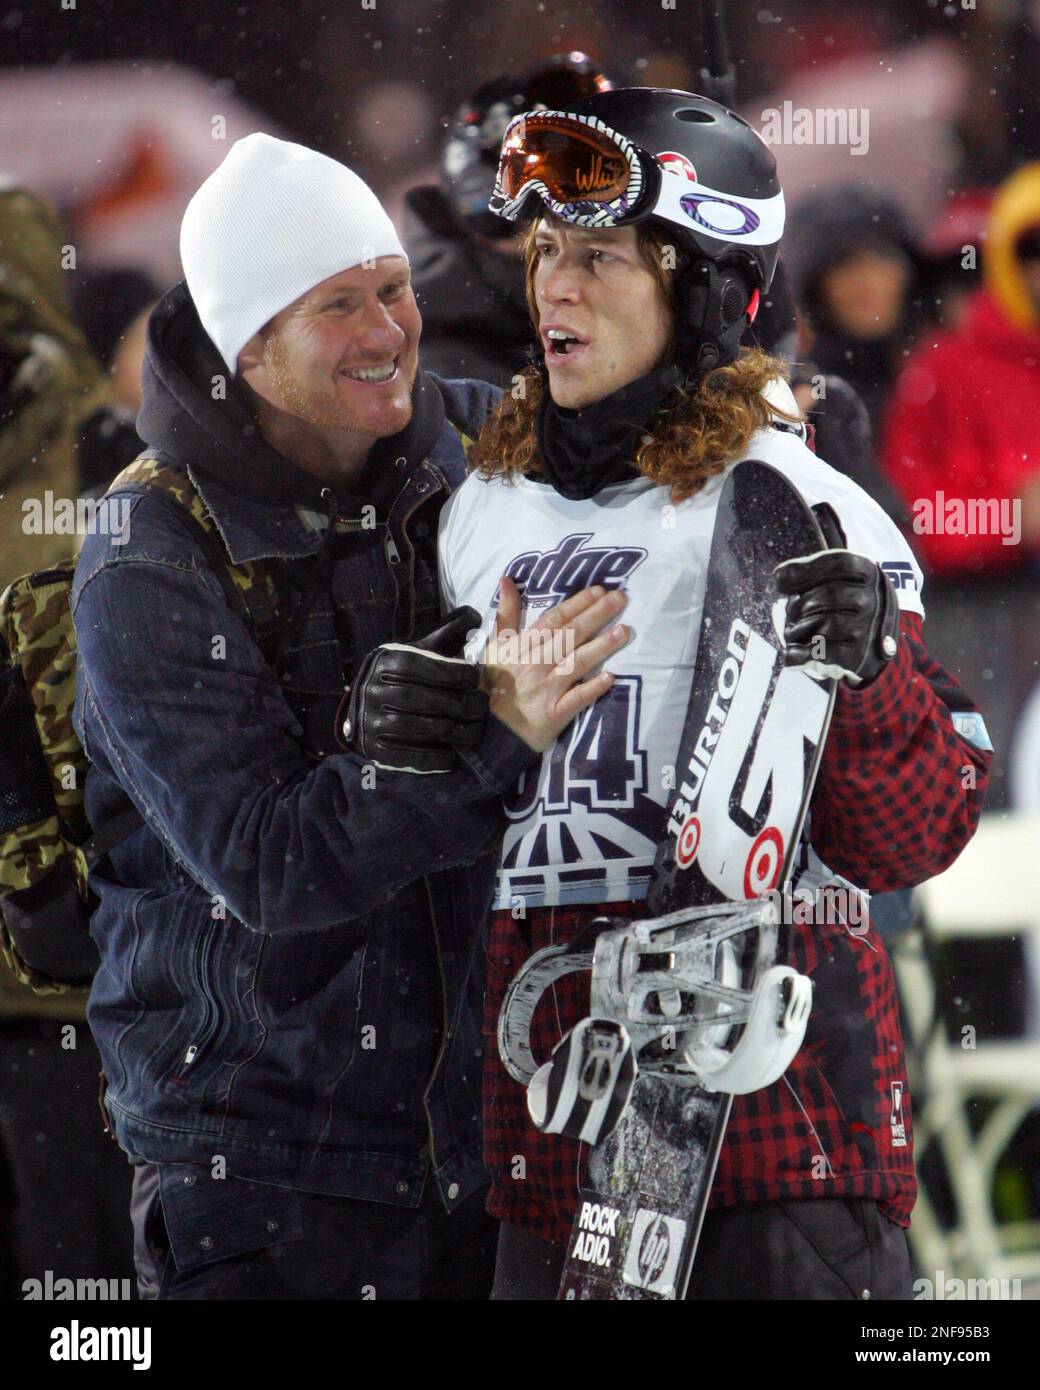 Pro snowboarder Shaun White on his second run during the men's